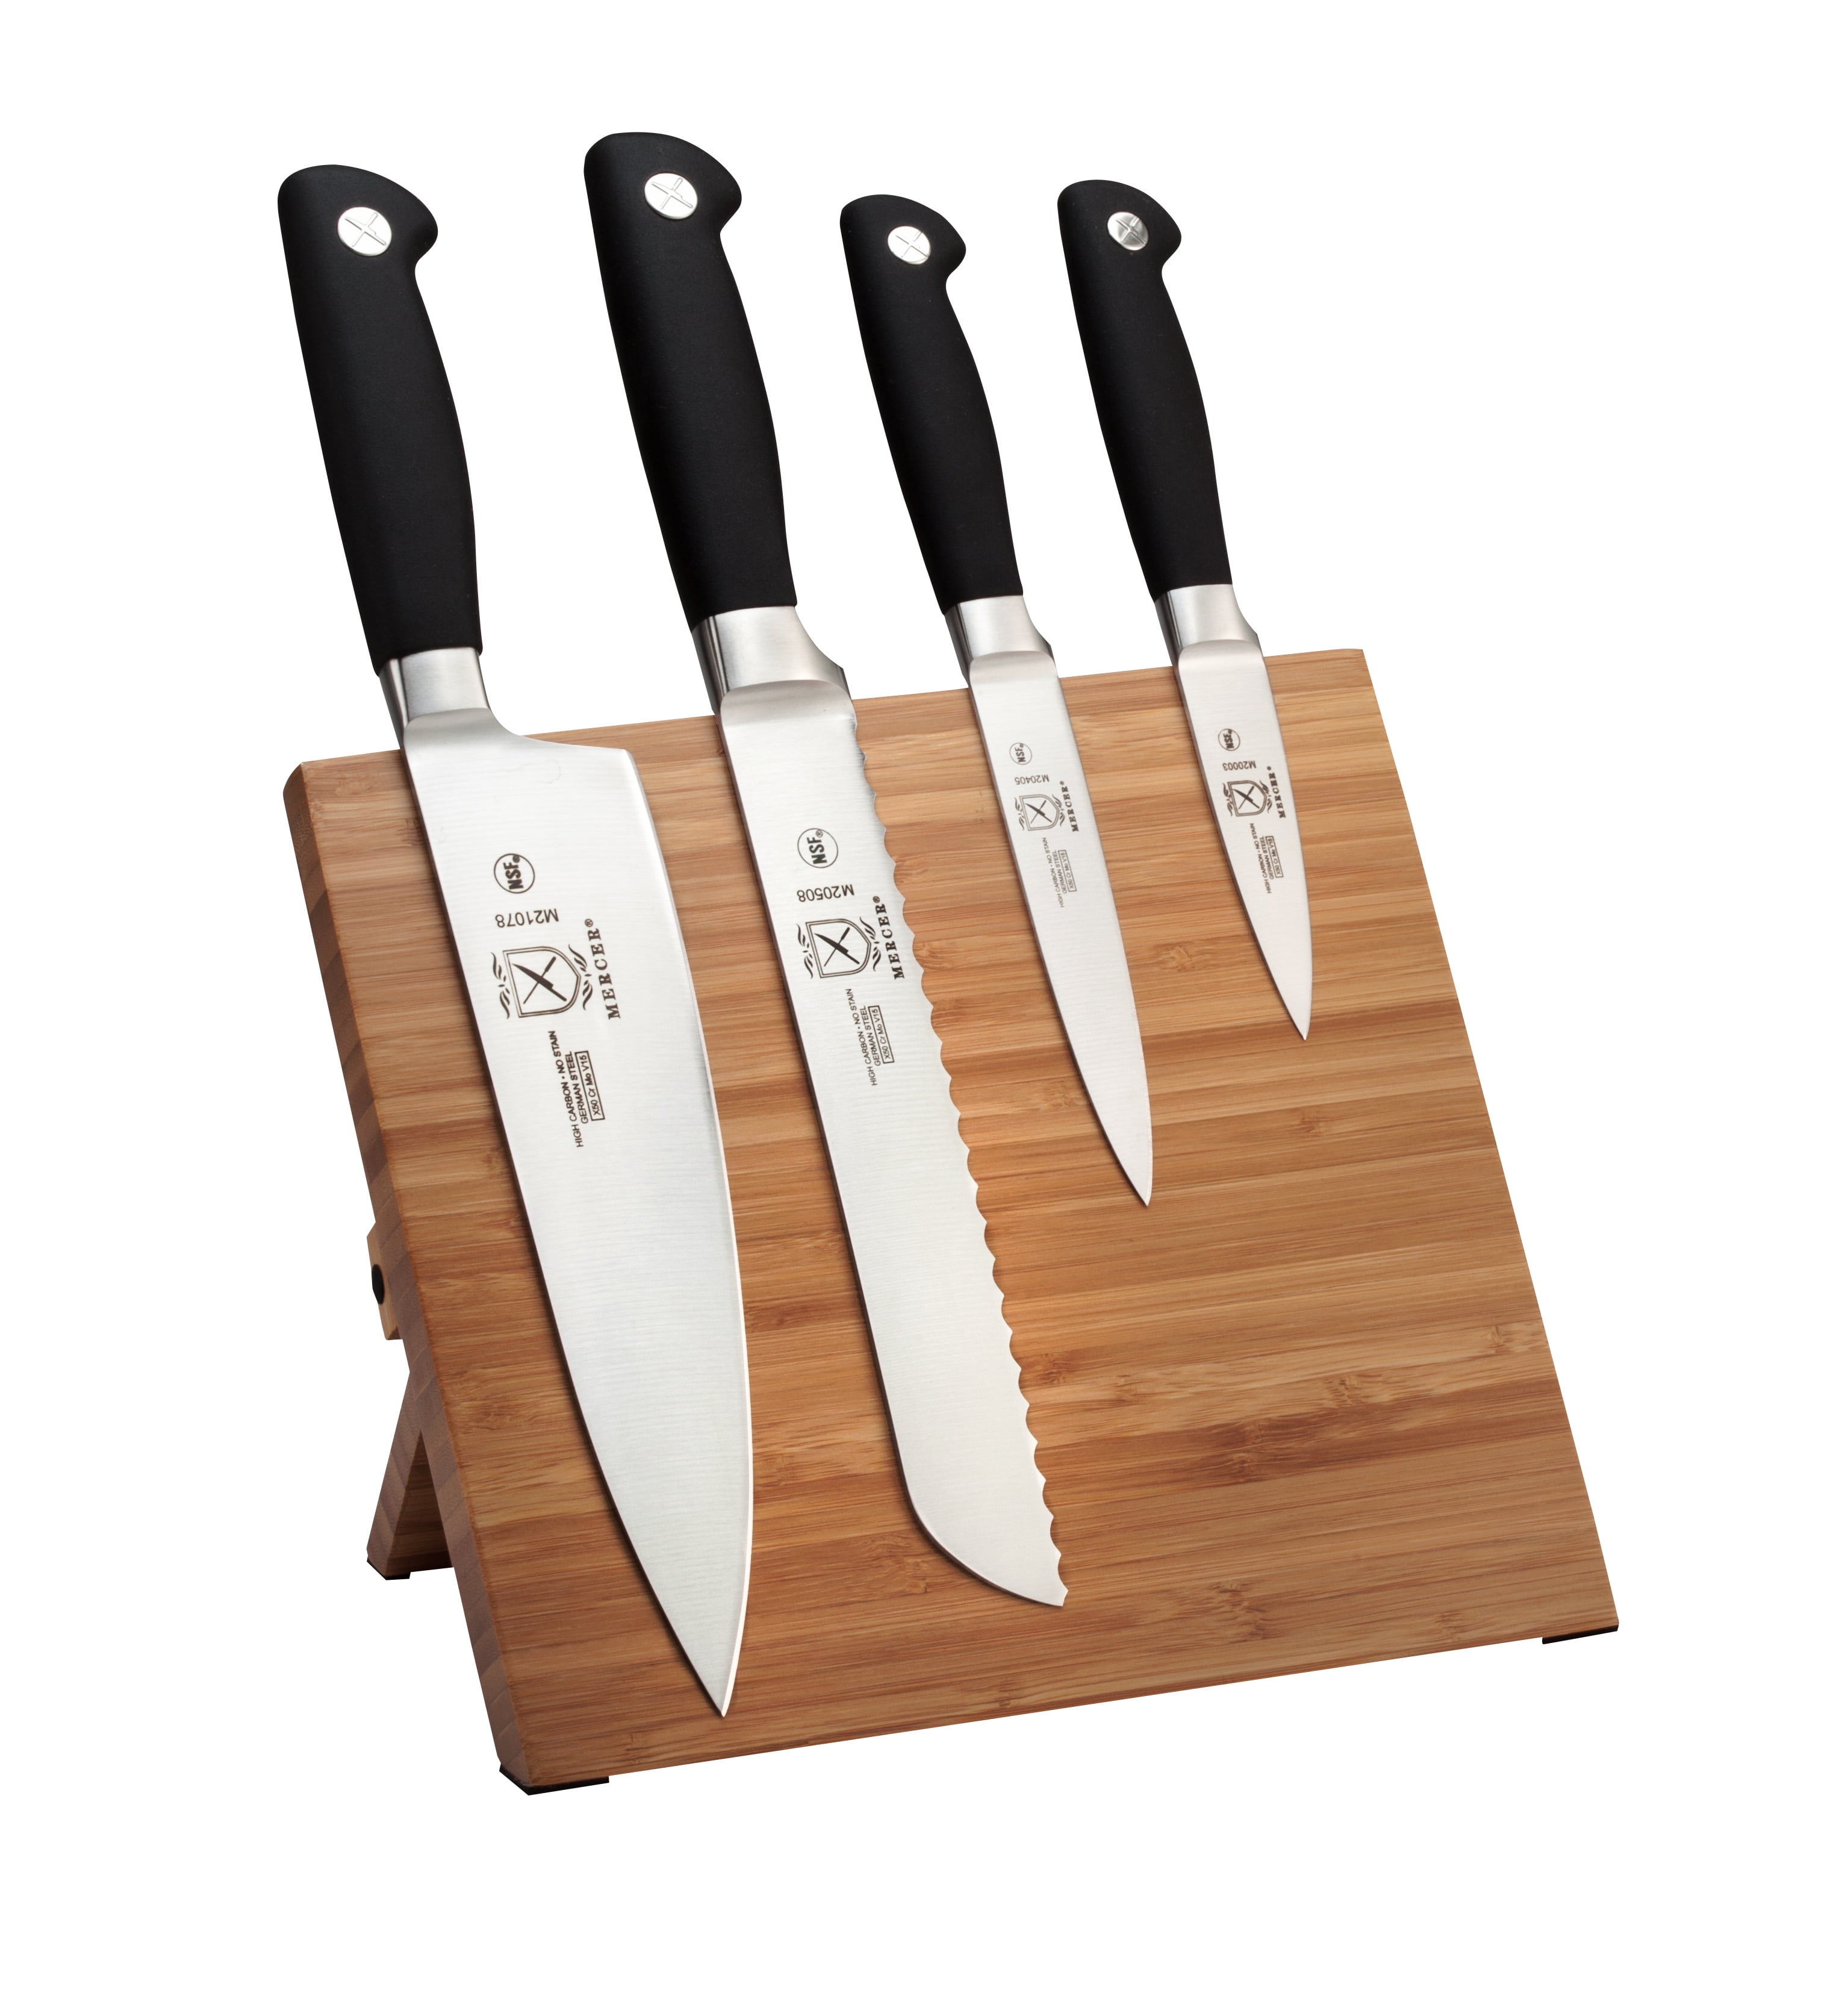  EatNeat 12 Piece Kitchen Knife Set - 5 Multi Color Stainless  Steel Knives with Safety Sheaths, a Cutting Board, and a Sharpener, Knives  Set, Kitchen Essentials, Camping Essential